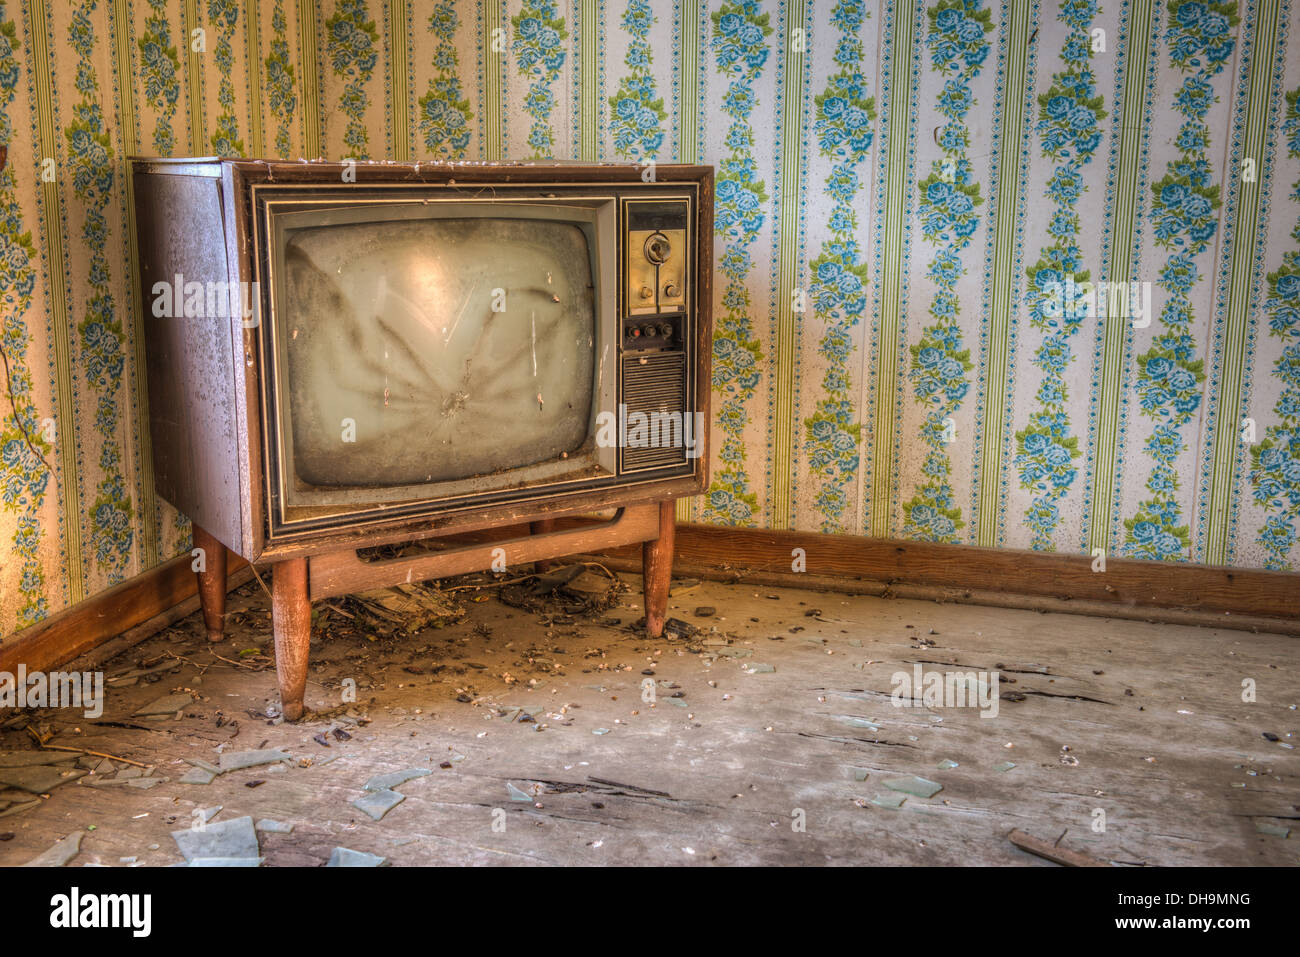 An abandoned television set in an abandoned rural home. Stock Photo